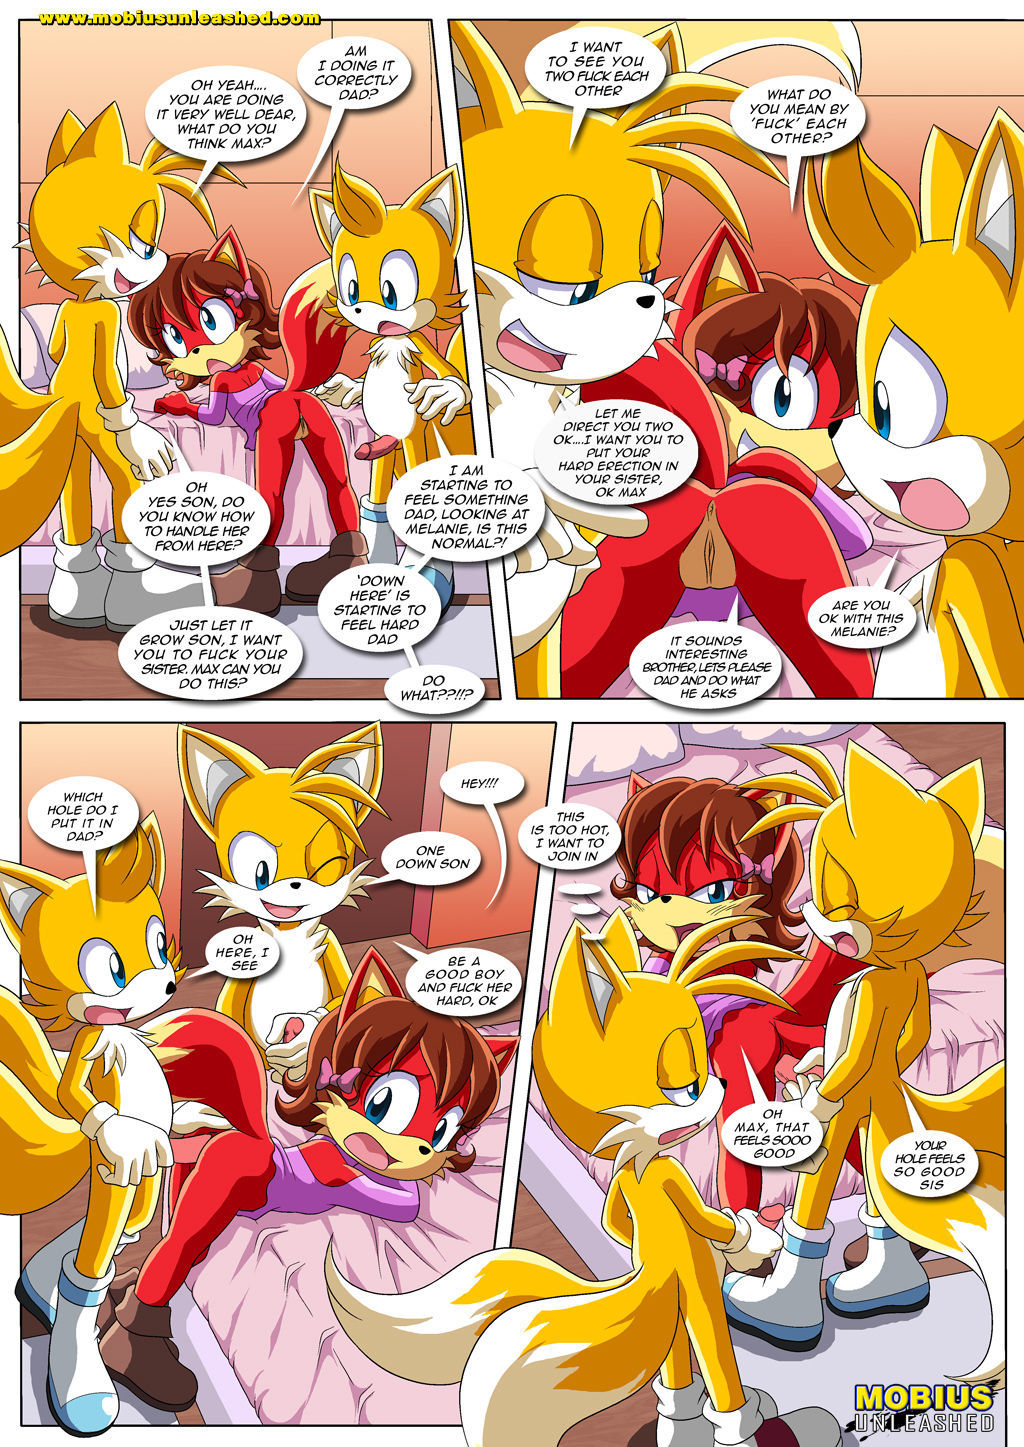 The Prower Family Affair (Sonic The Hedgehog) by Palcomix page 7